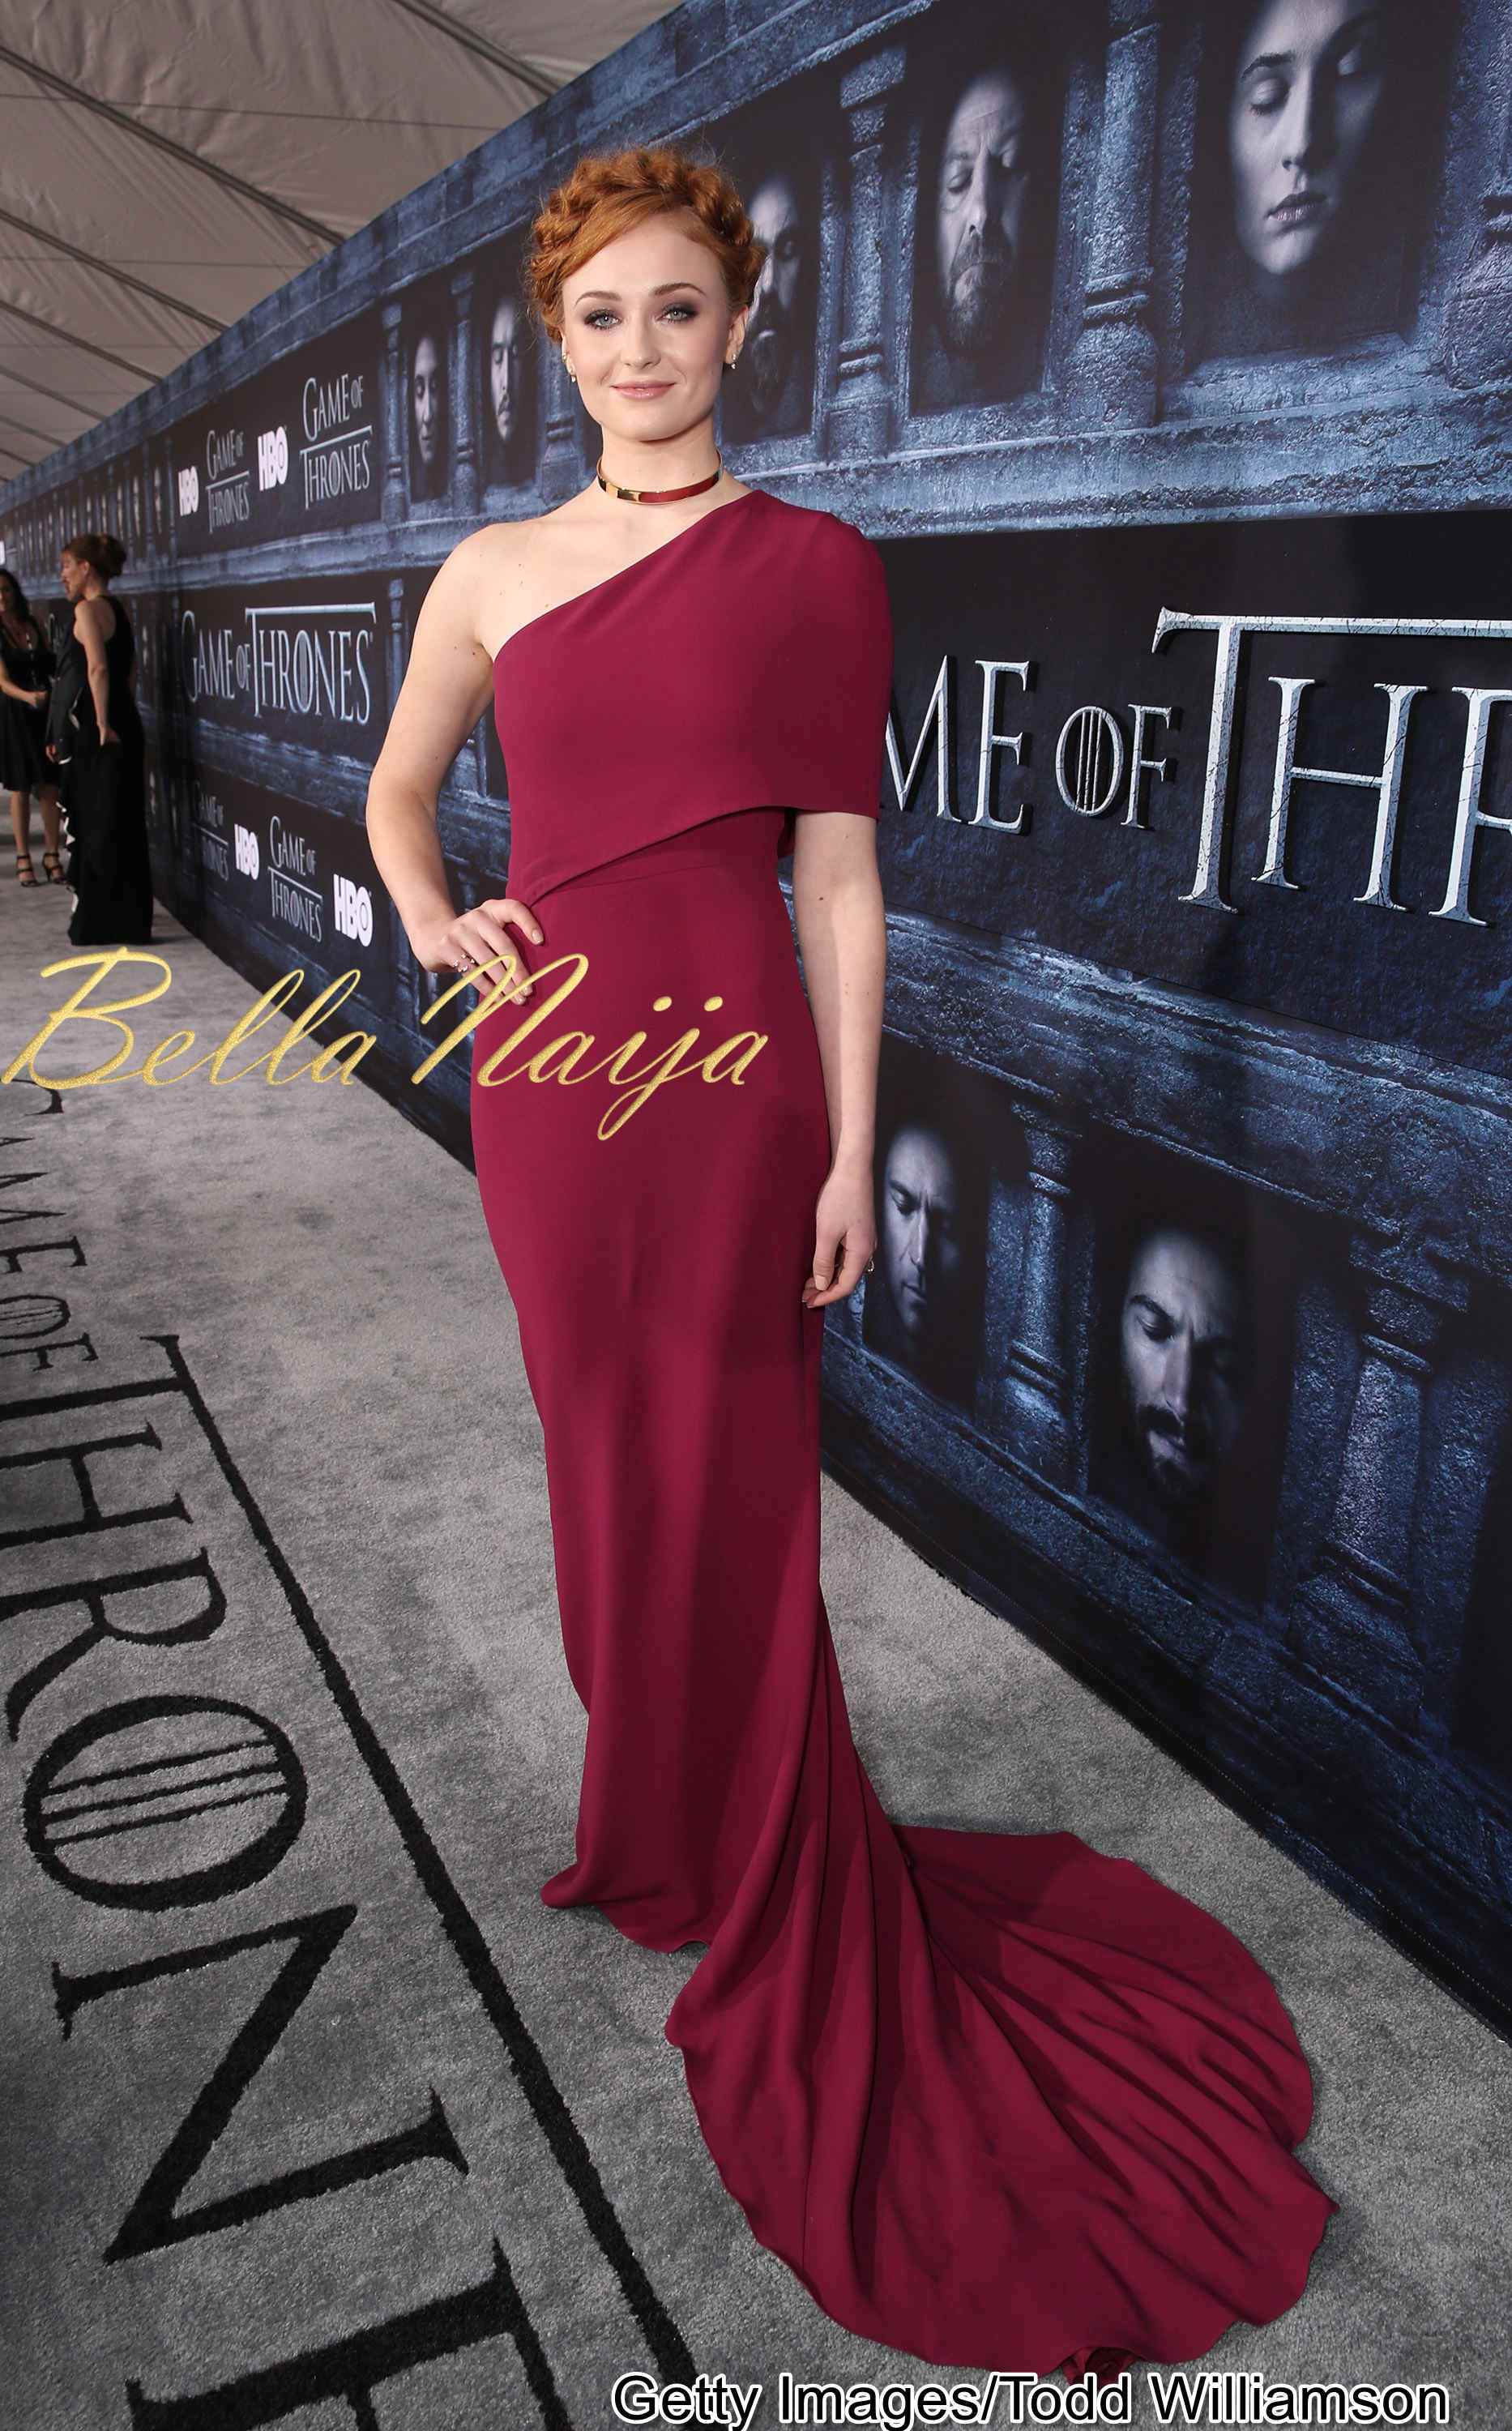 Red Carpet Photos: All the Glam from the Game of Thrones Season 6 Premiere | BellaNaija